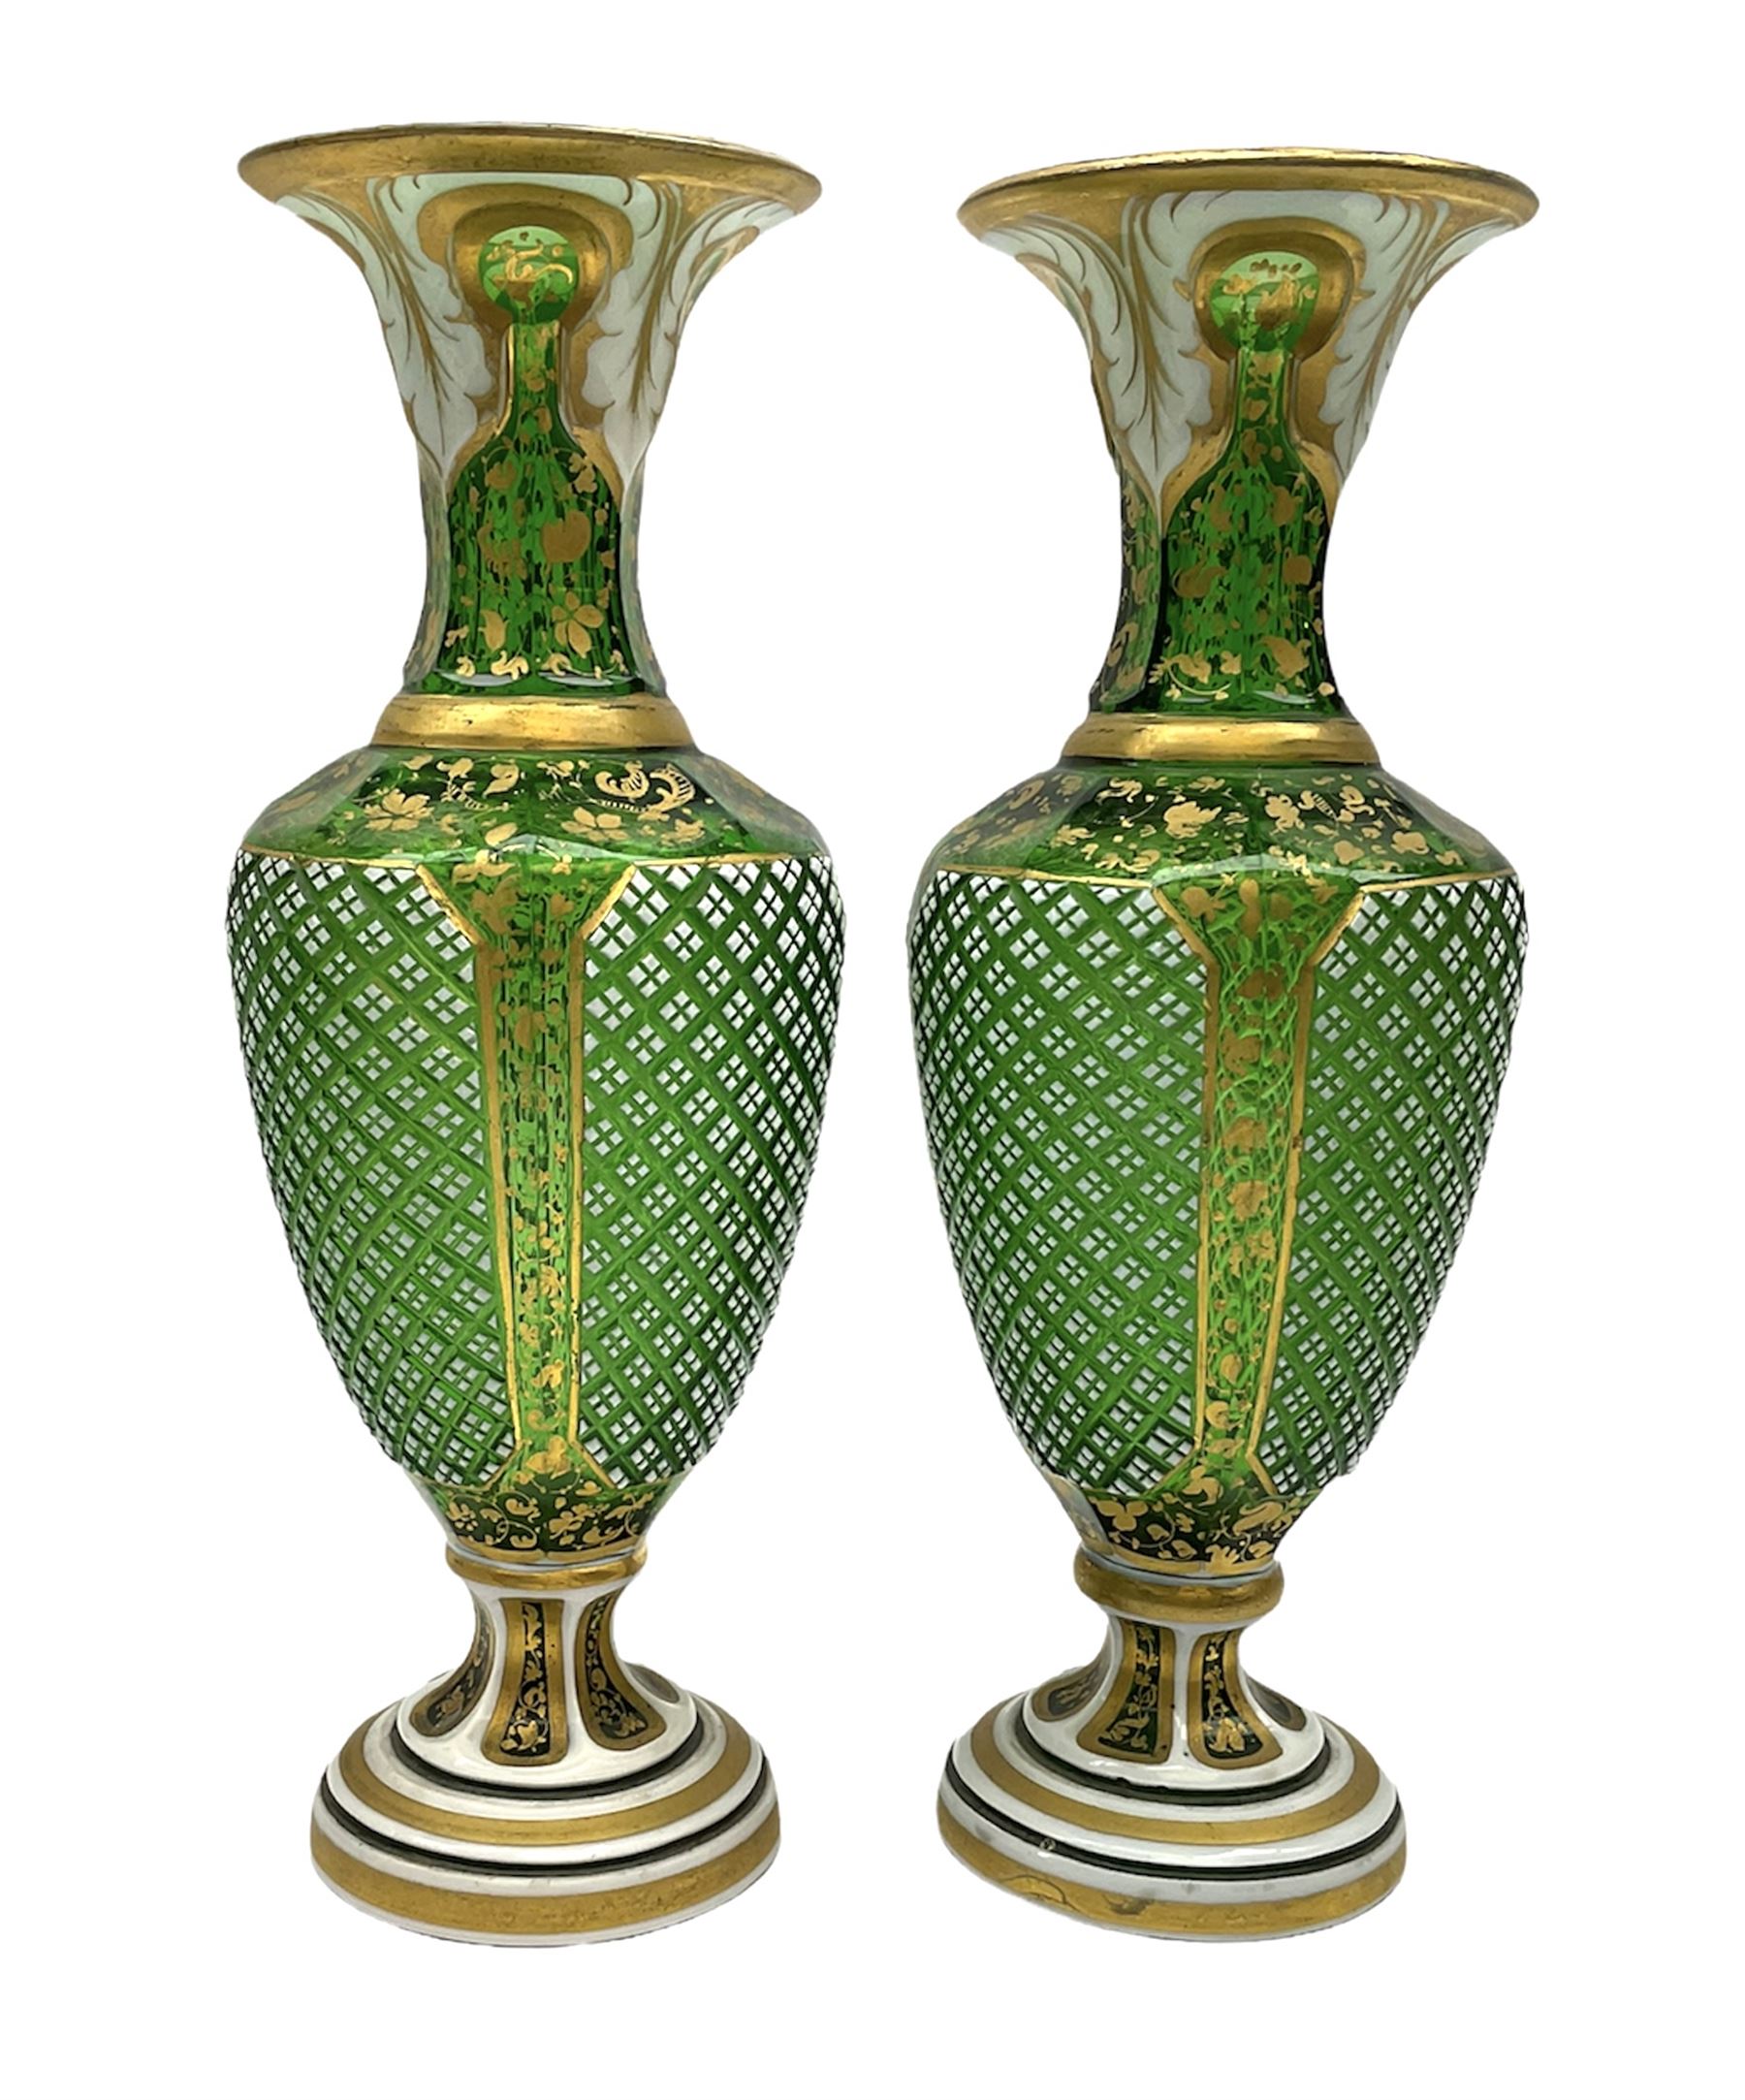 Pair of Bohemian green glass vases, overlaid in white with leaf panels ...